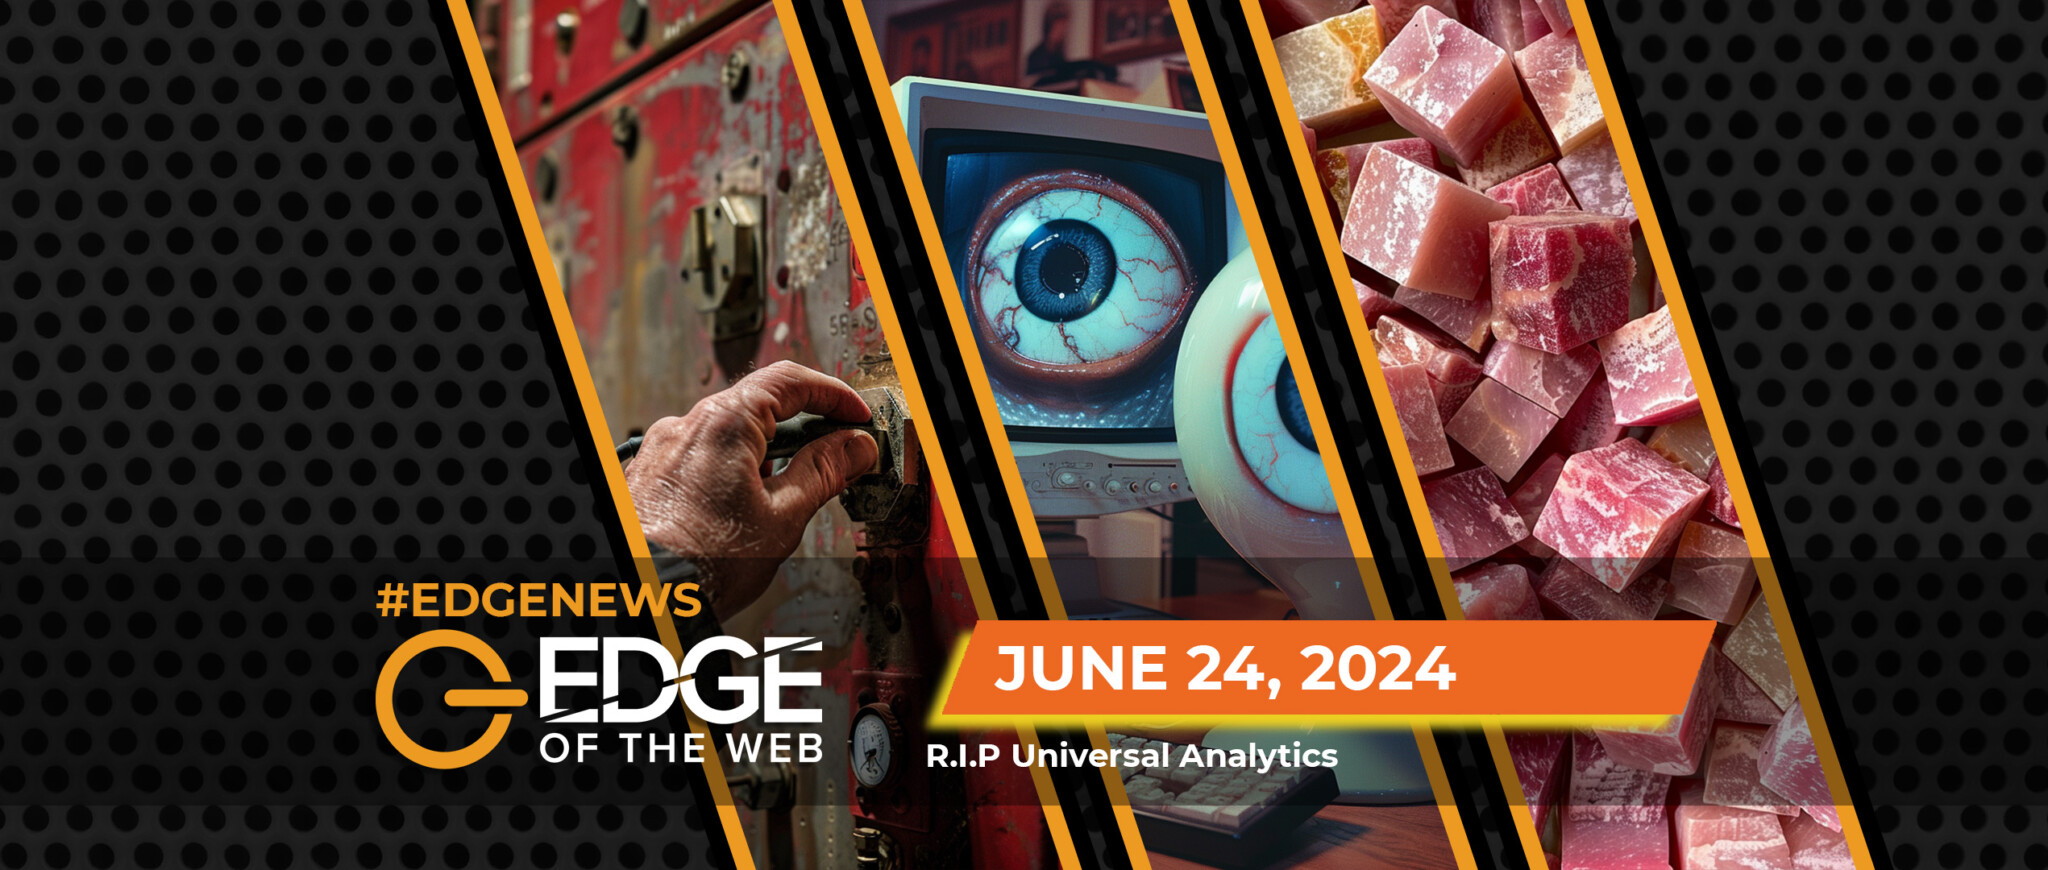 695 | News from the EDGE | Week of 6.24.2024